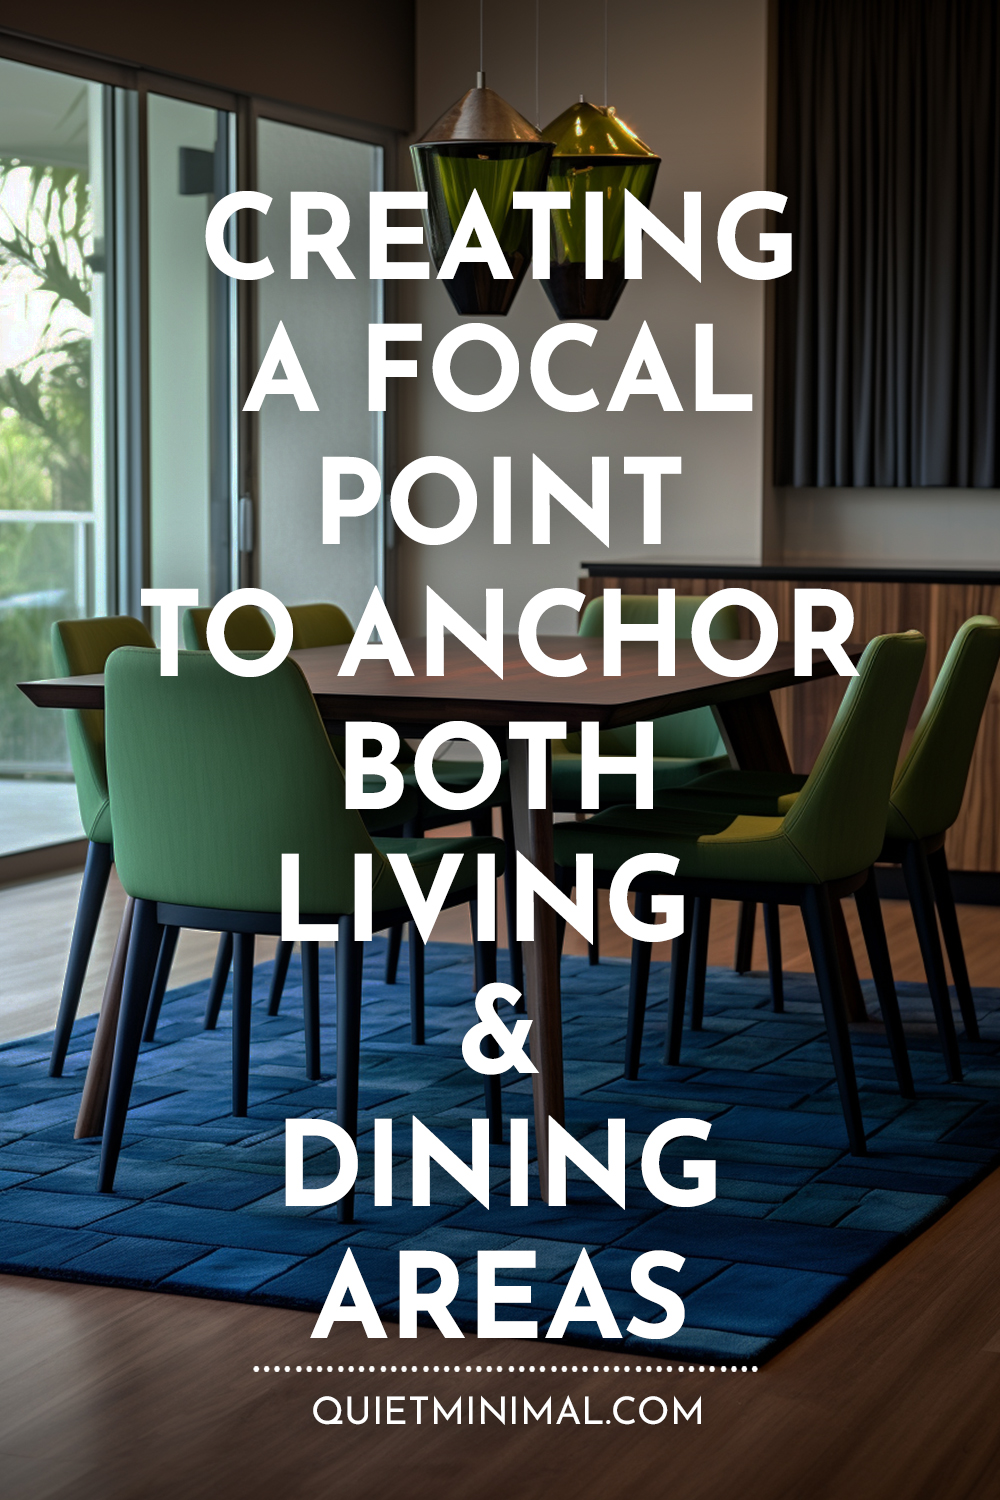 Creating a focal point to anchor both living and dining areas is essential for an aesthetically pleasing space.